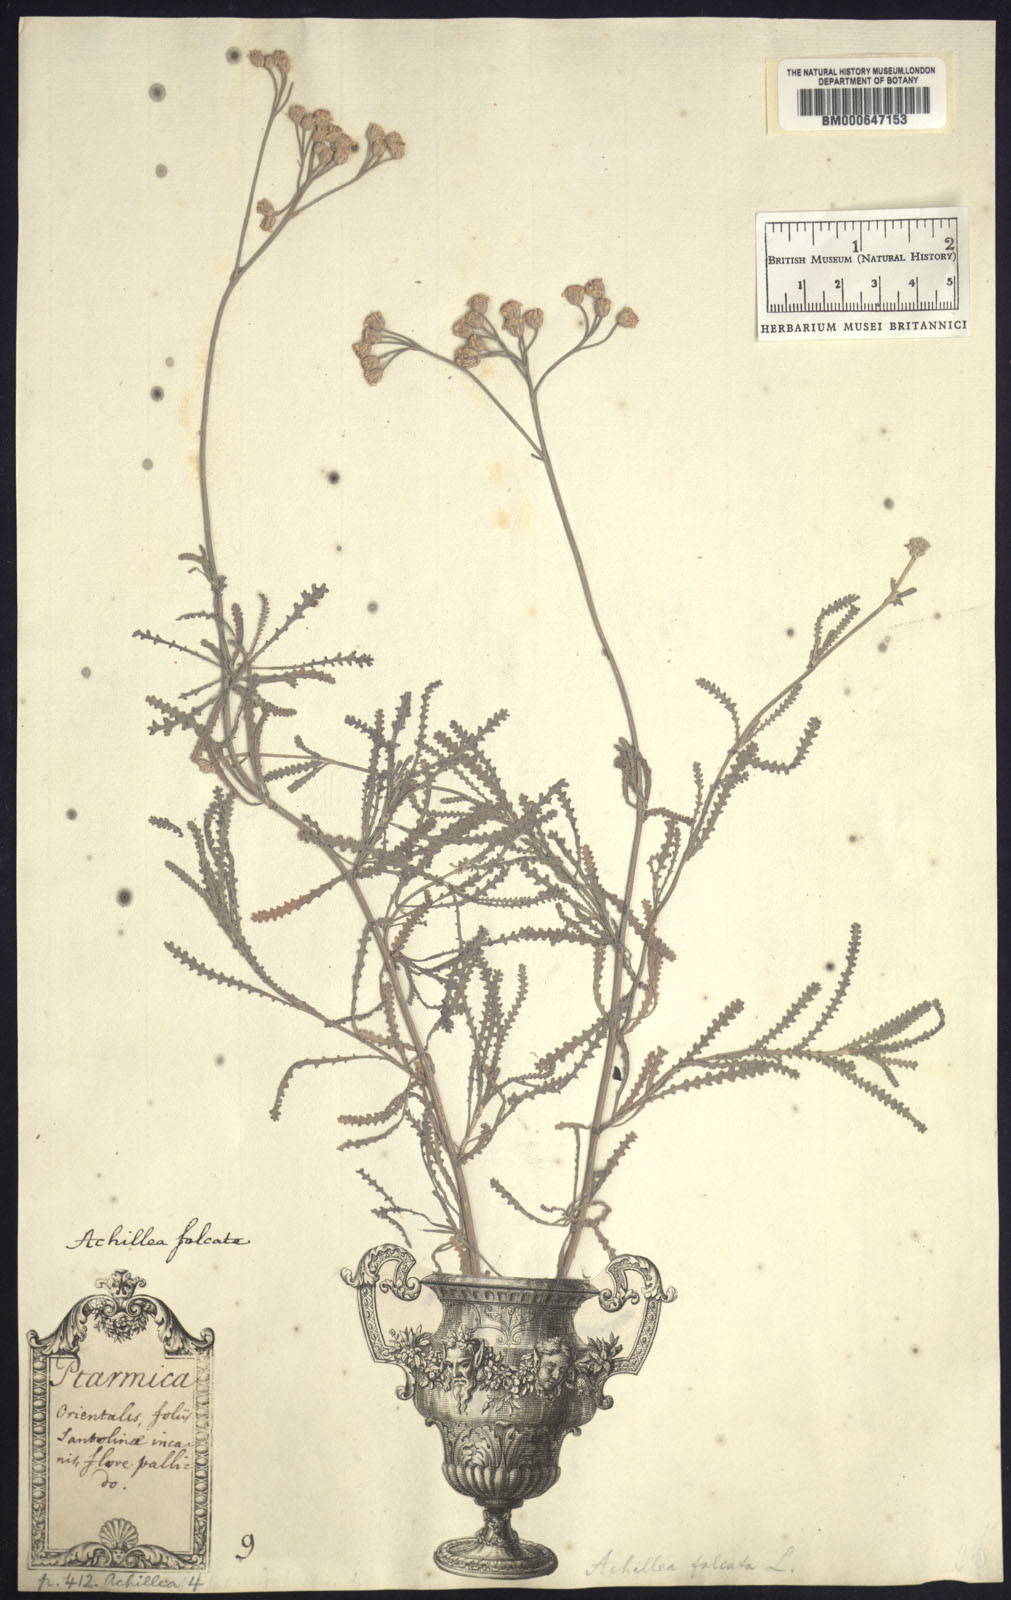 http://www.nhm.ac.uk//resources/research-curation/projects/clifford-herbarium/lgimages/BM000647153.JPG